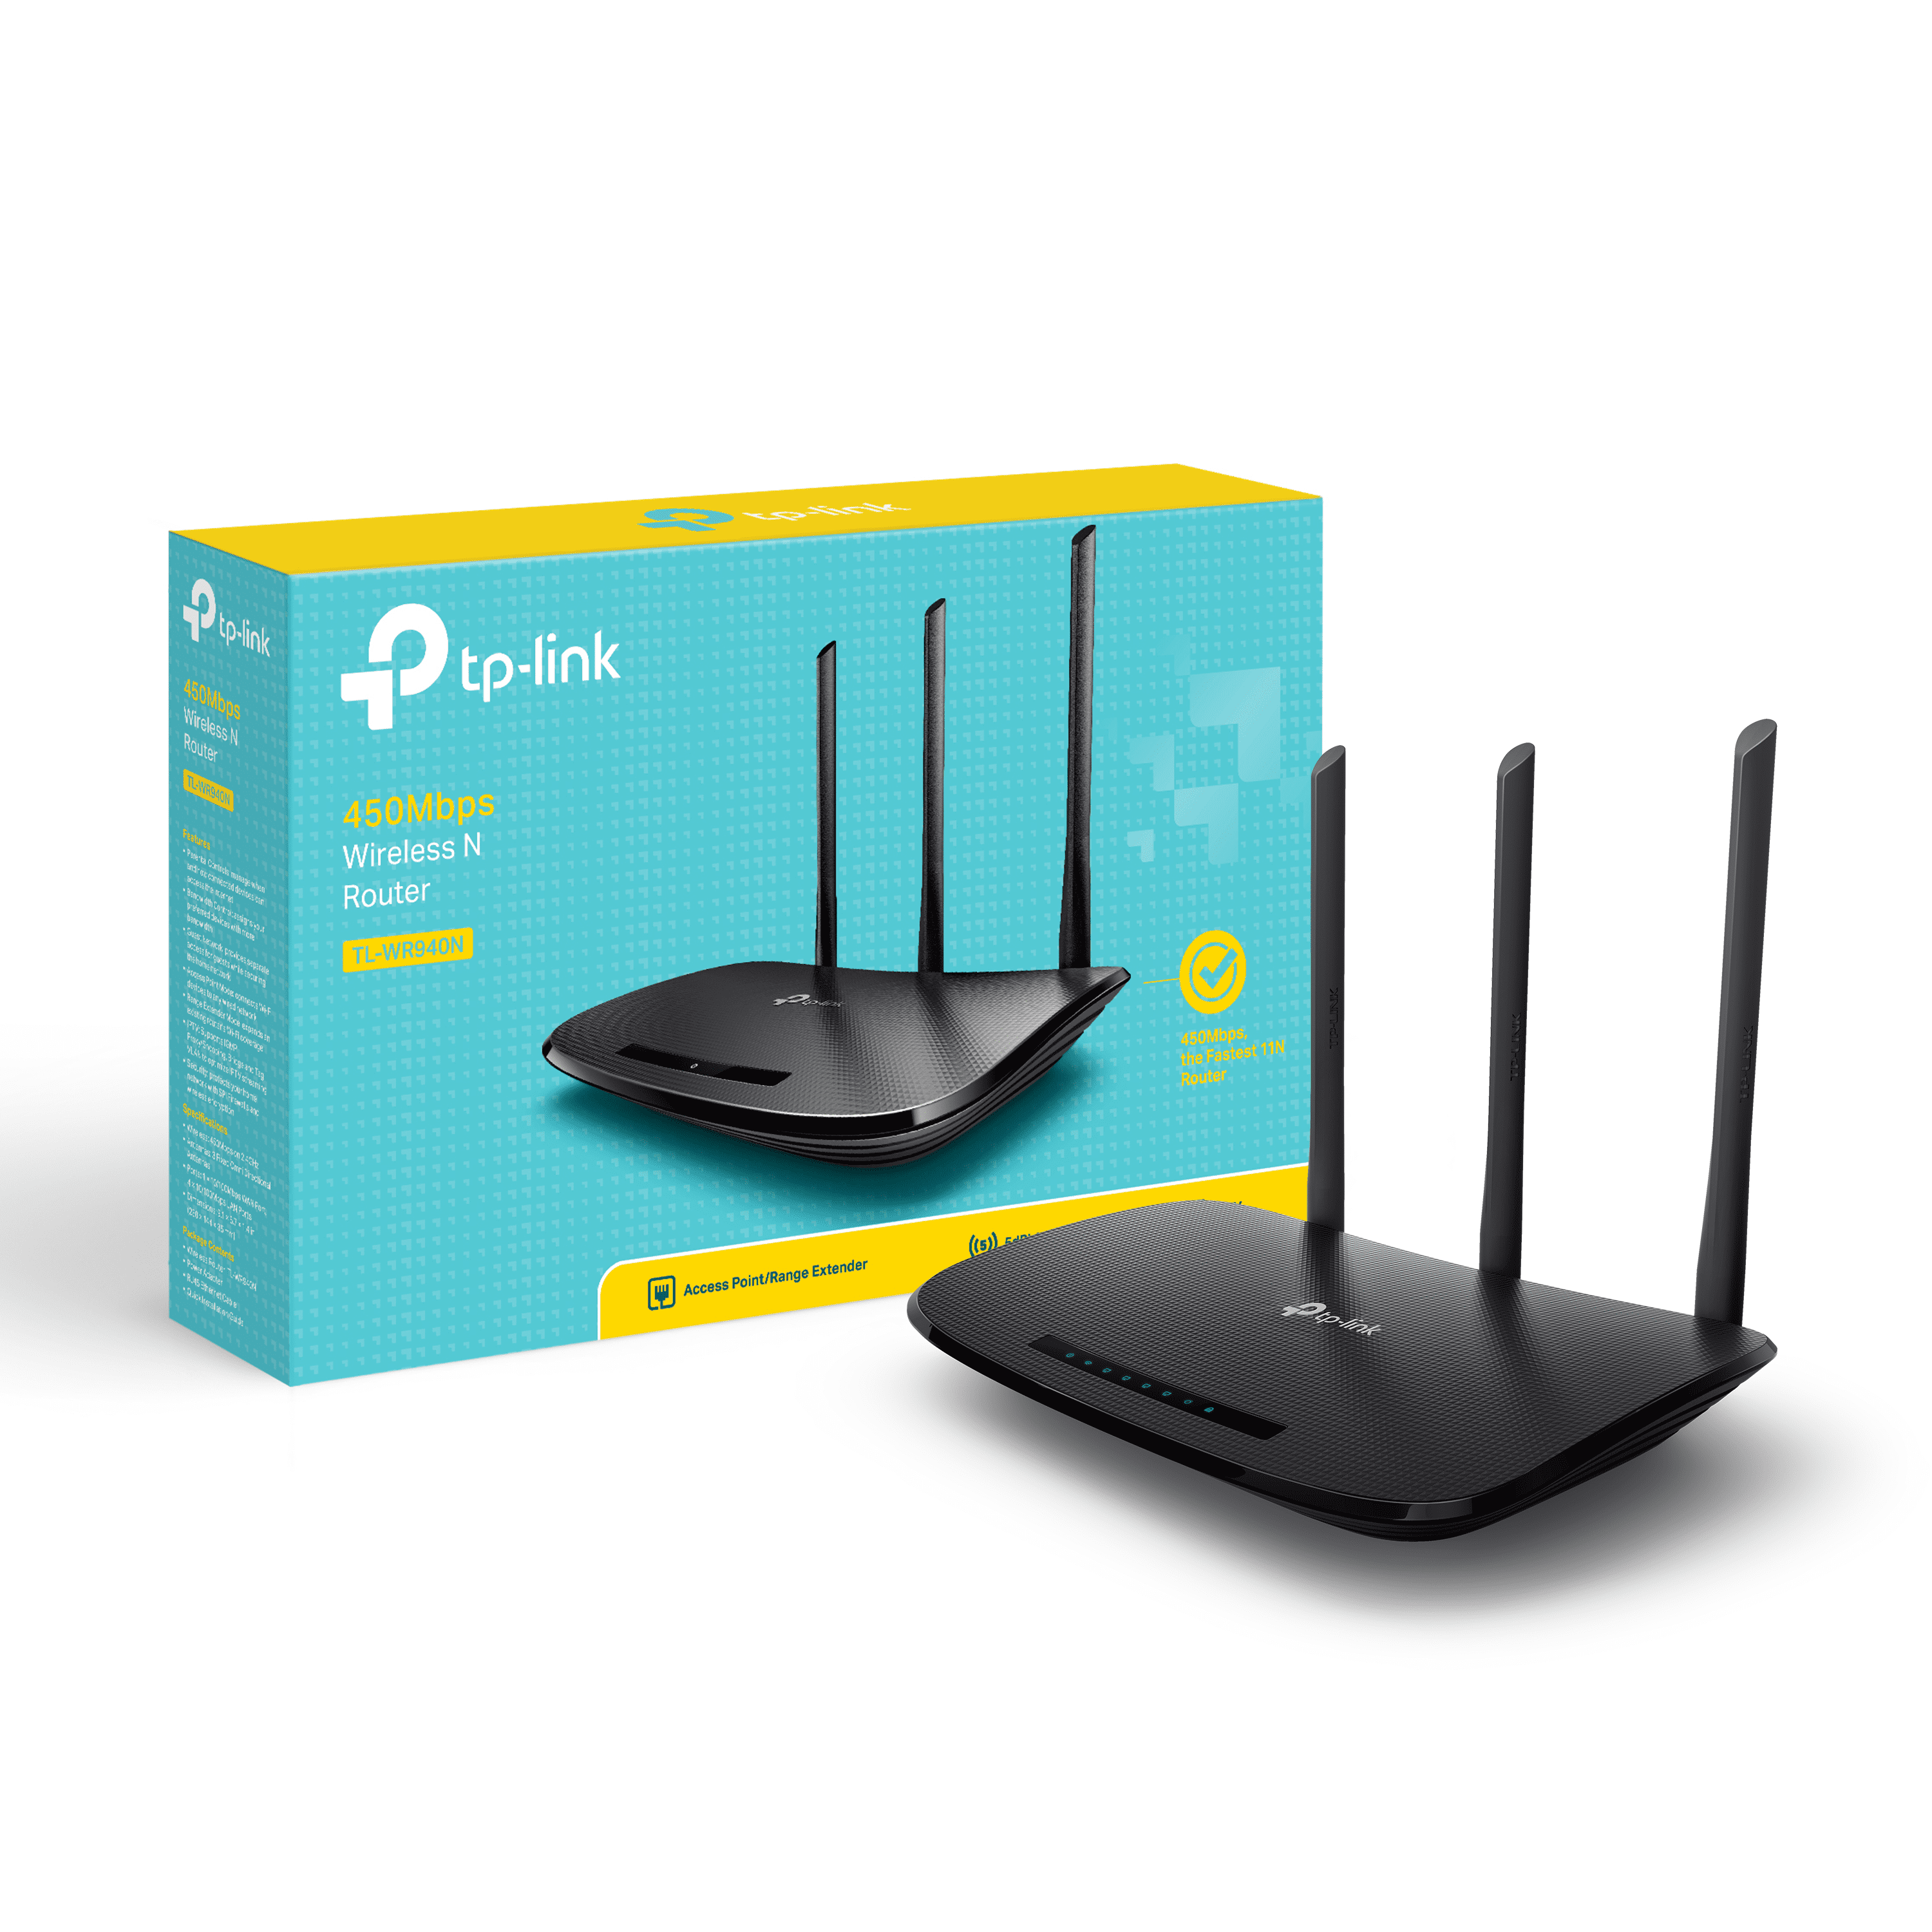 In honor Thunderstorm Surprised TP-Link TL-WR940N 450Mbps Wireless N Router Better Wireless Performance -  Walmart.com